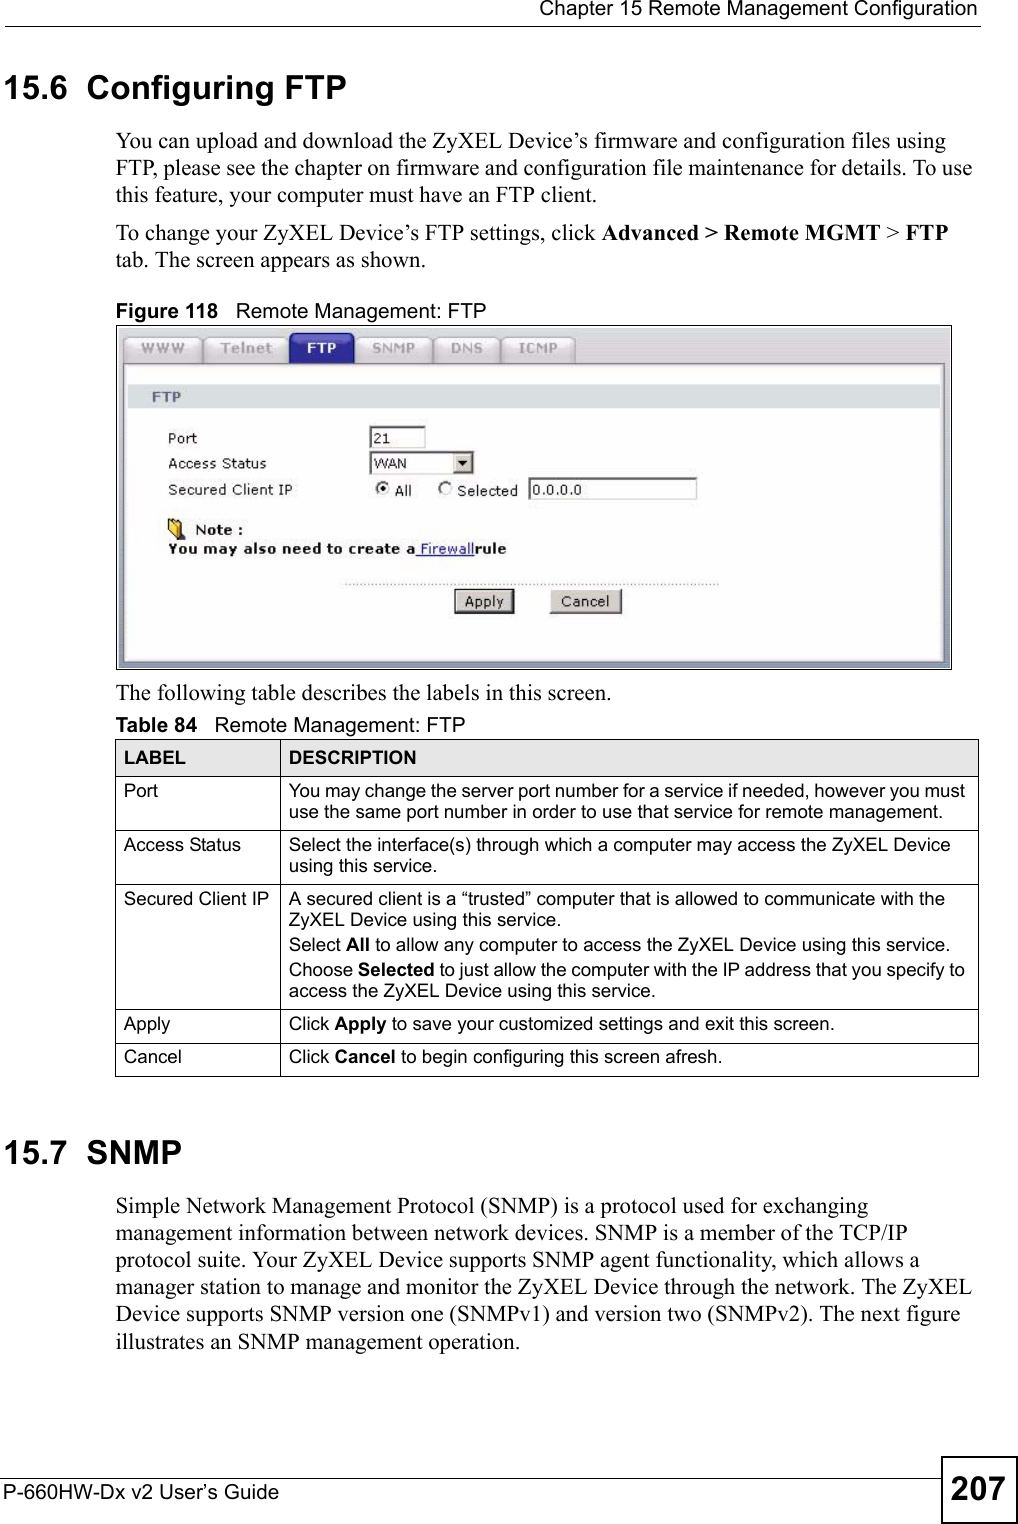  Chapter 15 Remote Management ConfigurationP-660HW-Dx v2 User’s Guide 20715.6  Configuring FTP You can upload and download the ZyXEL Device’s firmware and configuration files using FTP, please see the chapter on firmware and configuration file maintenance for details. To use this feature, your computer must have an FTP client.To change your ZyXEL Device’s FTP settings, click Advanced &gt; Remote MGMT &gt; FTP tab. The screen appears as shown.Figure 118   Remote Management: FTPThe following table describes the labels in this screen.15.7  SNMPSimple Network Management Protocol (SNMP) is a protocol used for exchanging management information between network devices. SNMP is a member of the TCP/IP protocol suite. Your ZyXEL Device supports SNMP agent functionality, which allows a manager station to manage and monitor the ZyXEL Device through the network. The ZyXEL Device supports SNMP version one (SNMPv1) and version two (SNMPv2). The next figure illustrates an SNMP management operation.Table 84   Remote Management: FTPLABEL DESCRIPTIONPort You may change the server port number for a service if needed, however you must use the same port number in order to use that service for remote management.Access Status Select the interface(s) through which a computer may access the ZyXEL Device using this service.Secured Client IP A secured client is a “trusted” computer that is allowed to communicate with the ZyXEL Device using this service. Select All to allow any computer to access the ZyXEL Device using this service.Choose Selected to just allow the computer with the IP address that you specify to access the ZyXEL Device using this service.Apply Click Apply to save your customized settings and exit this screen. Cancel Click Cancel to begin configuring this screen afresh.